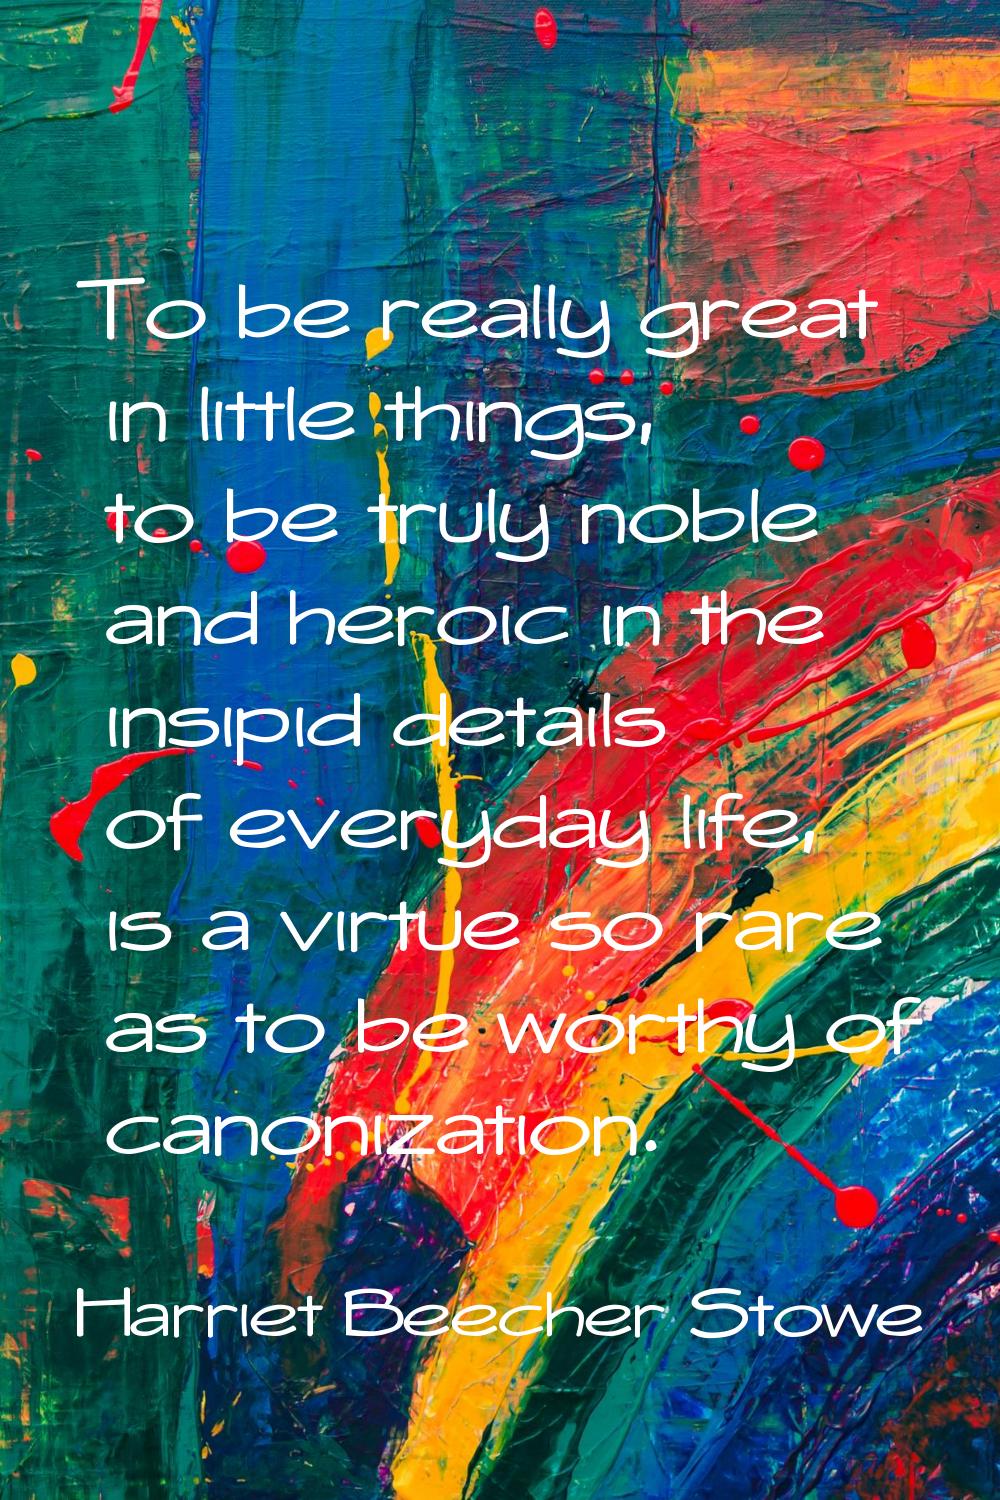 To be really great in little things, to be truly noble and heroic in the insipid details of everyda